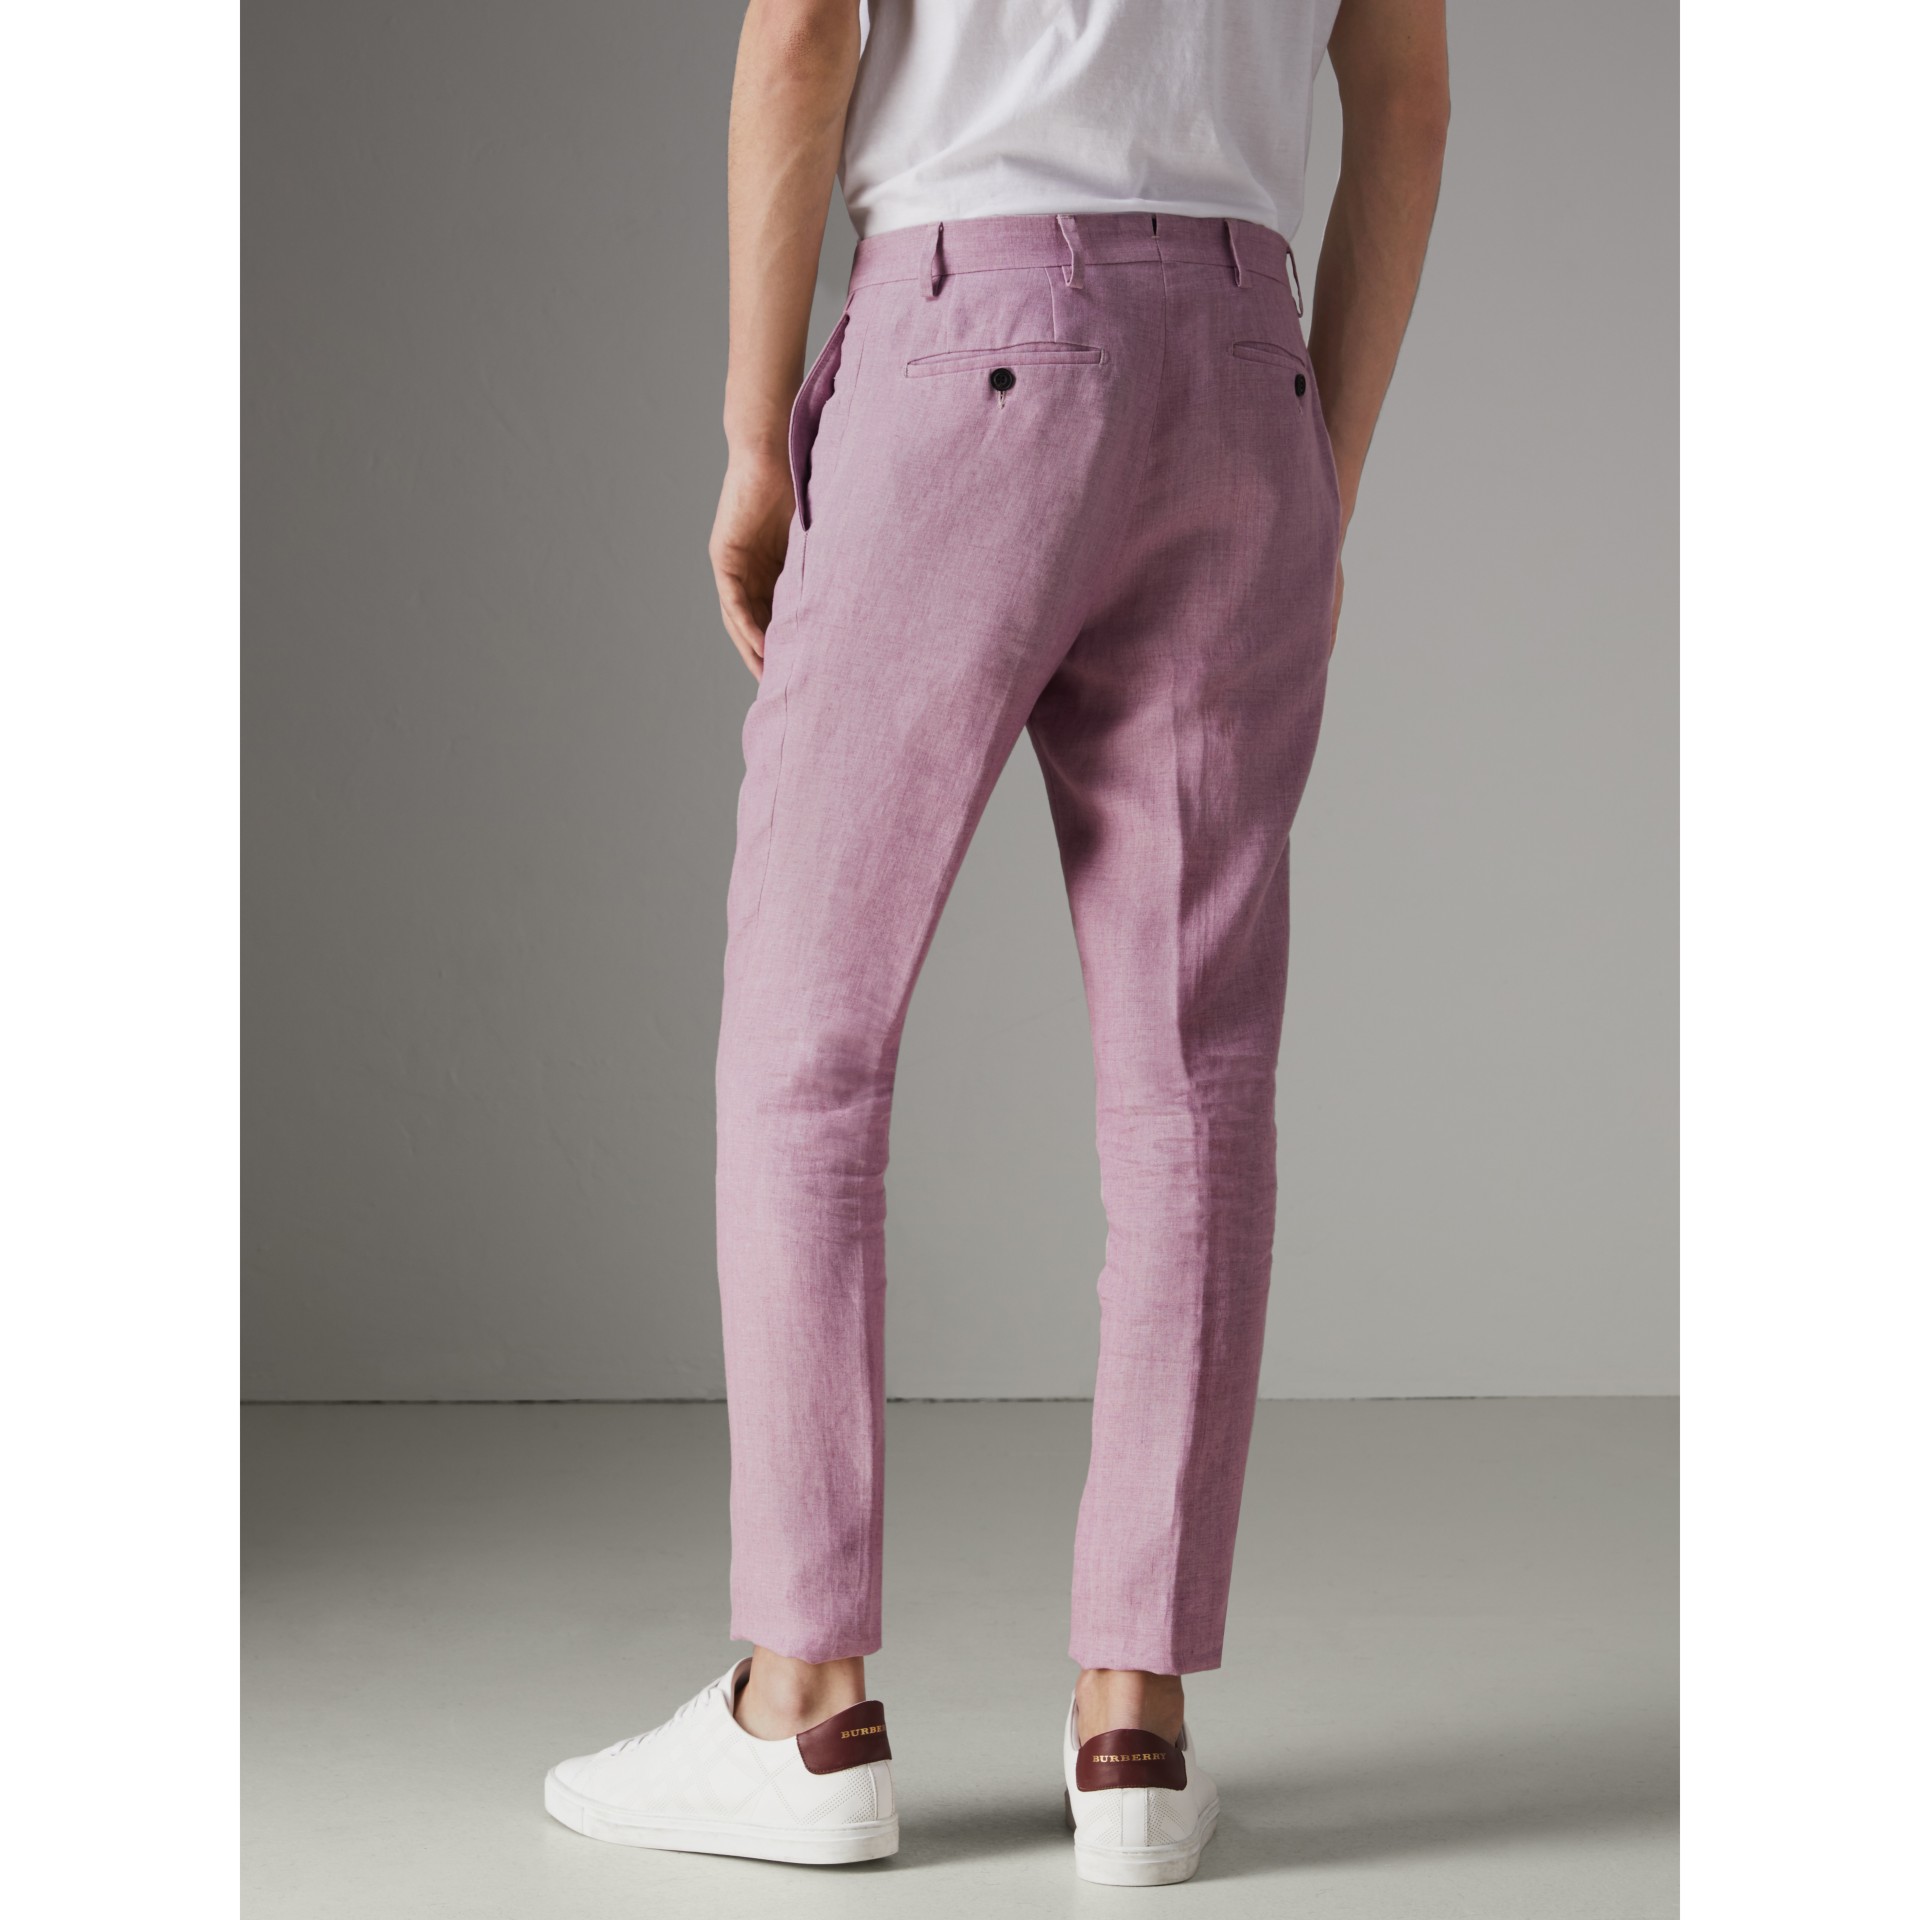 Soho Fit Linen Trousers in Pink Heather - Men | Burberry United States